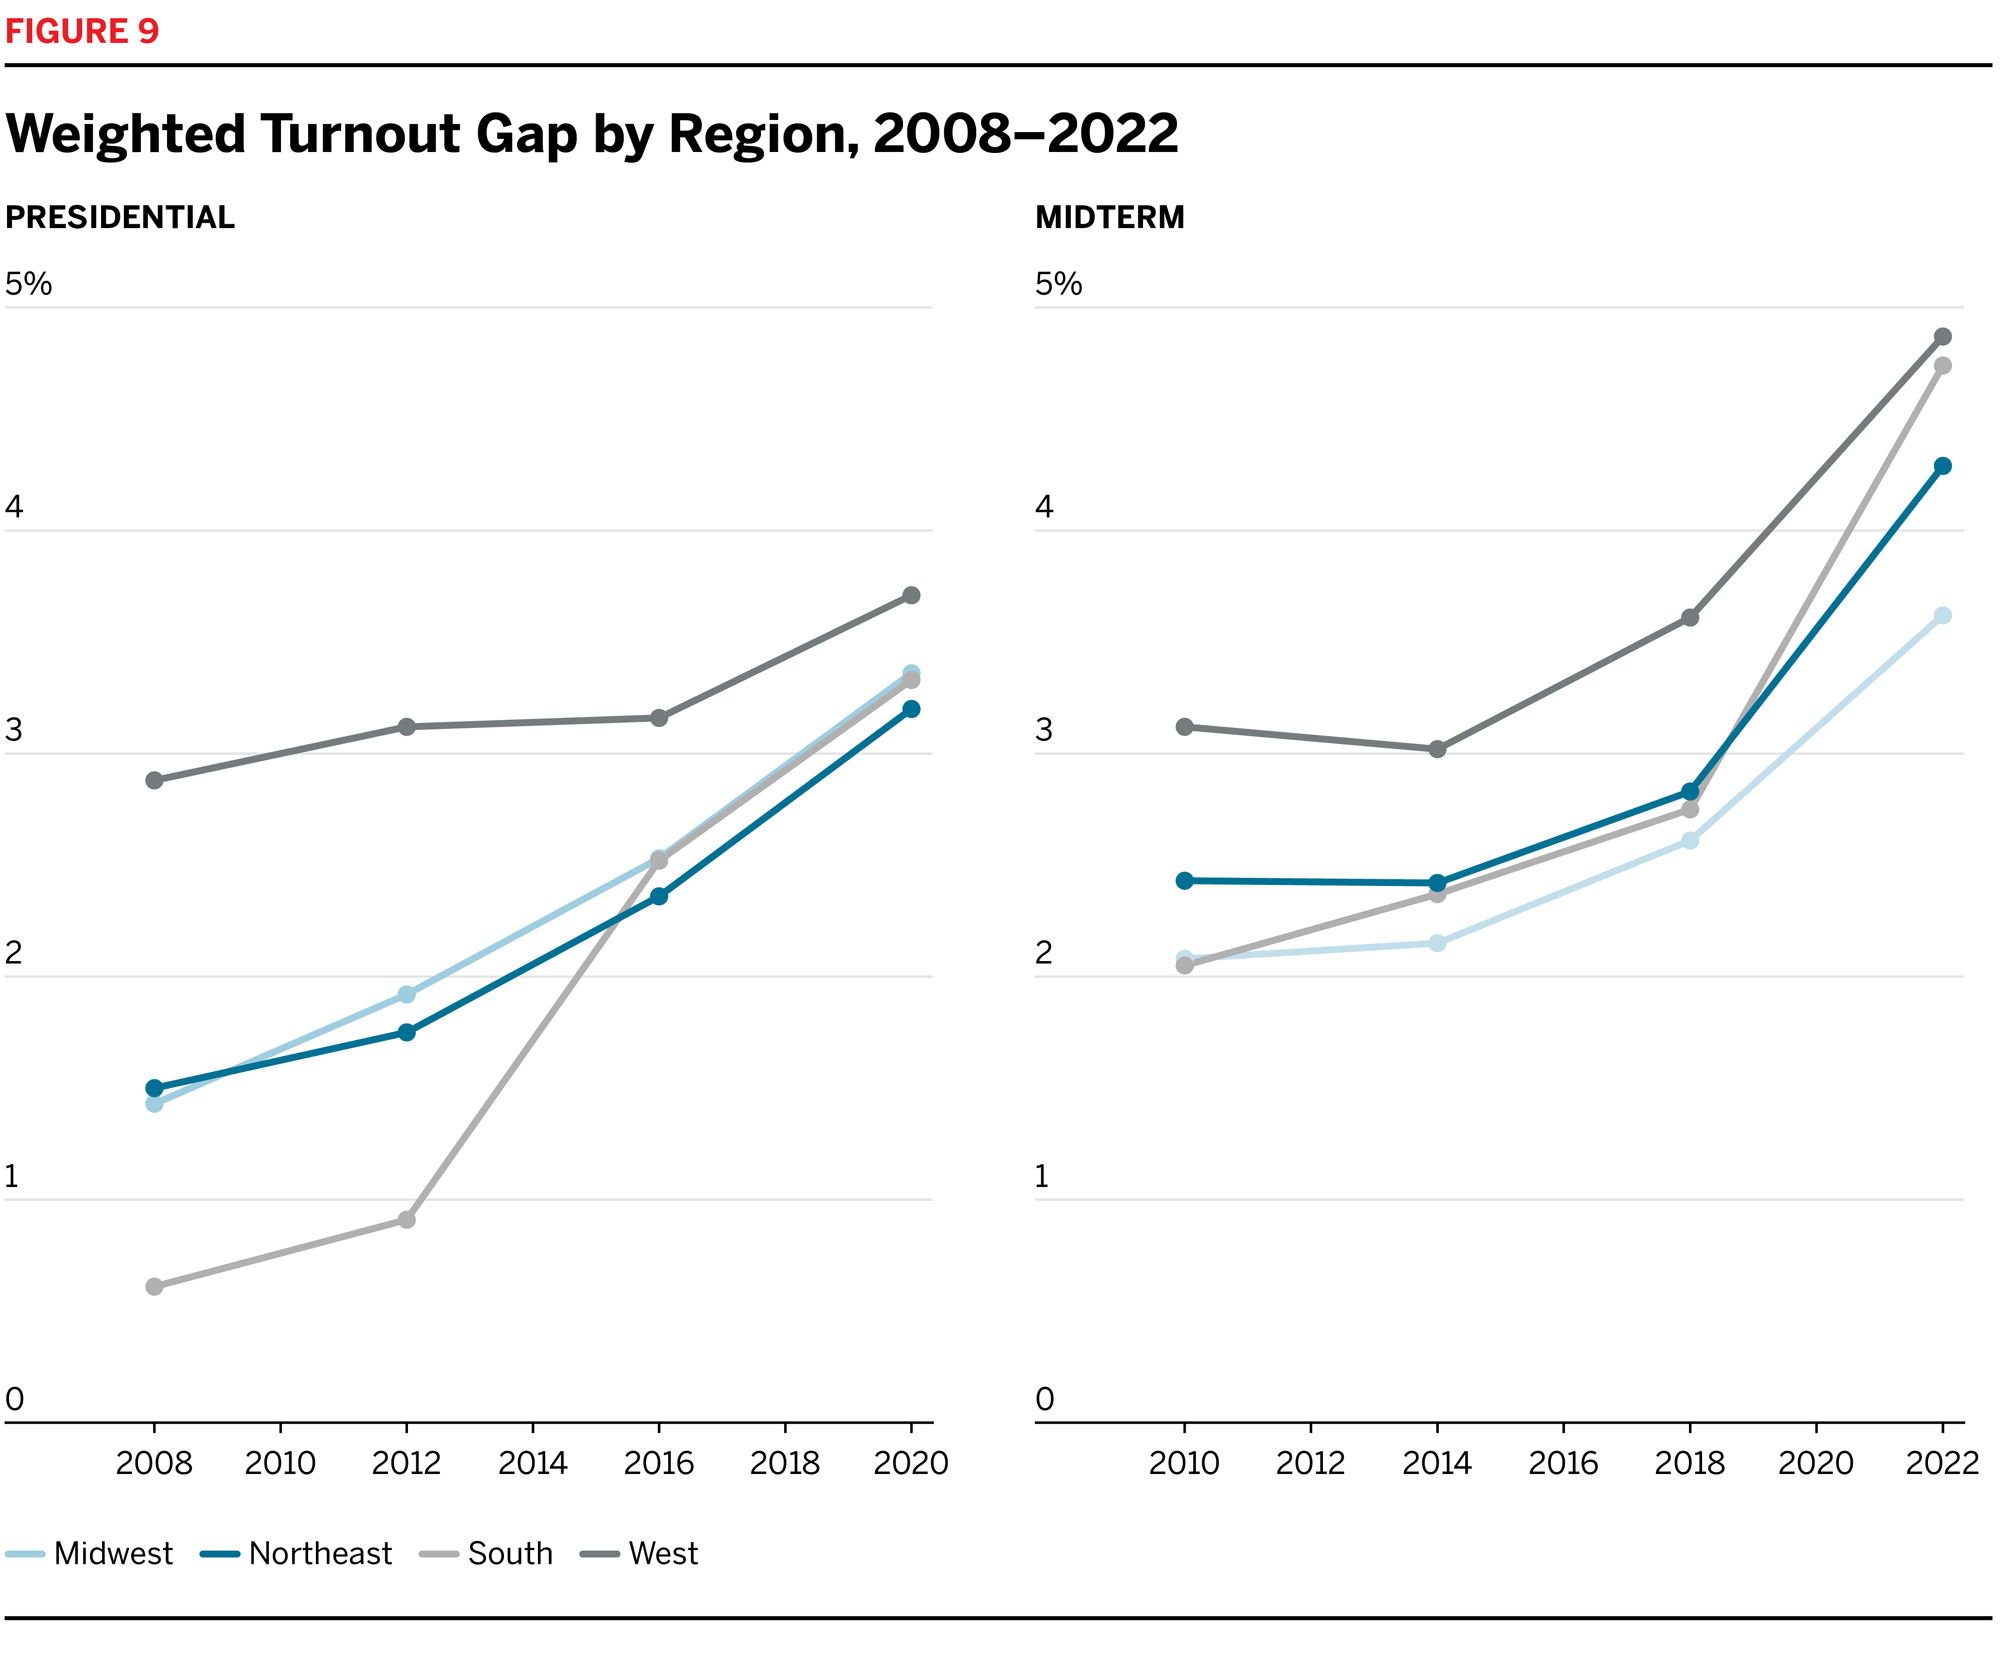 Weighted Turnout Gap by Region, 2008-2022 line graph